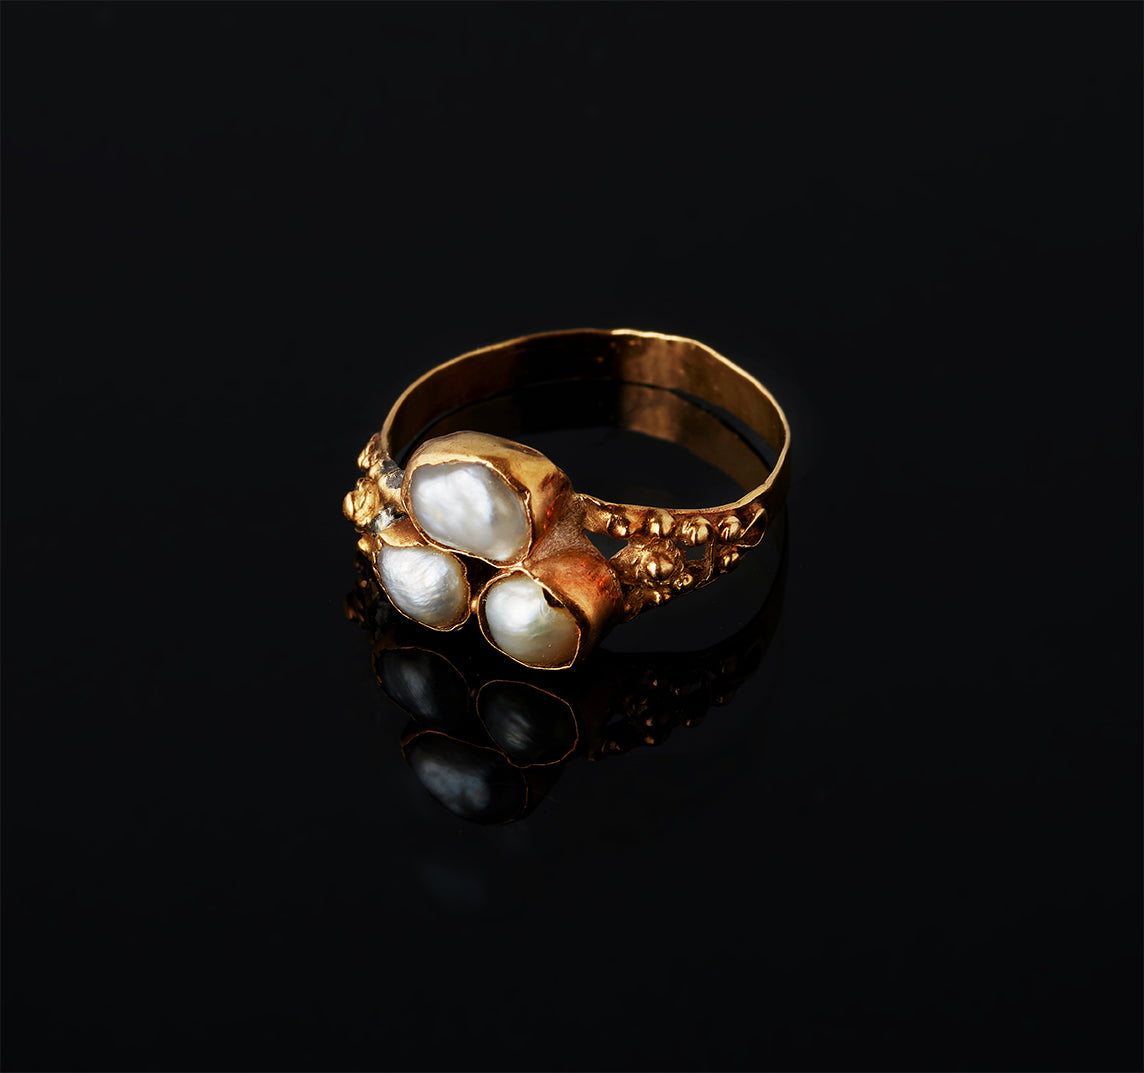 Ring - White Pearls